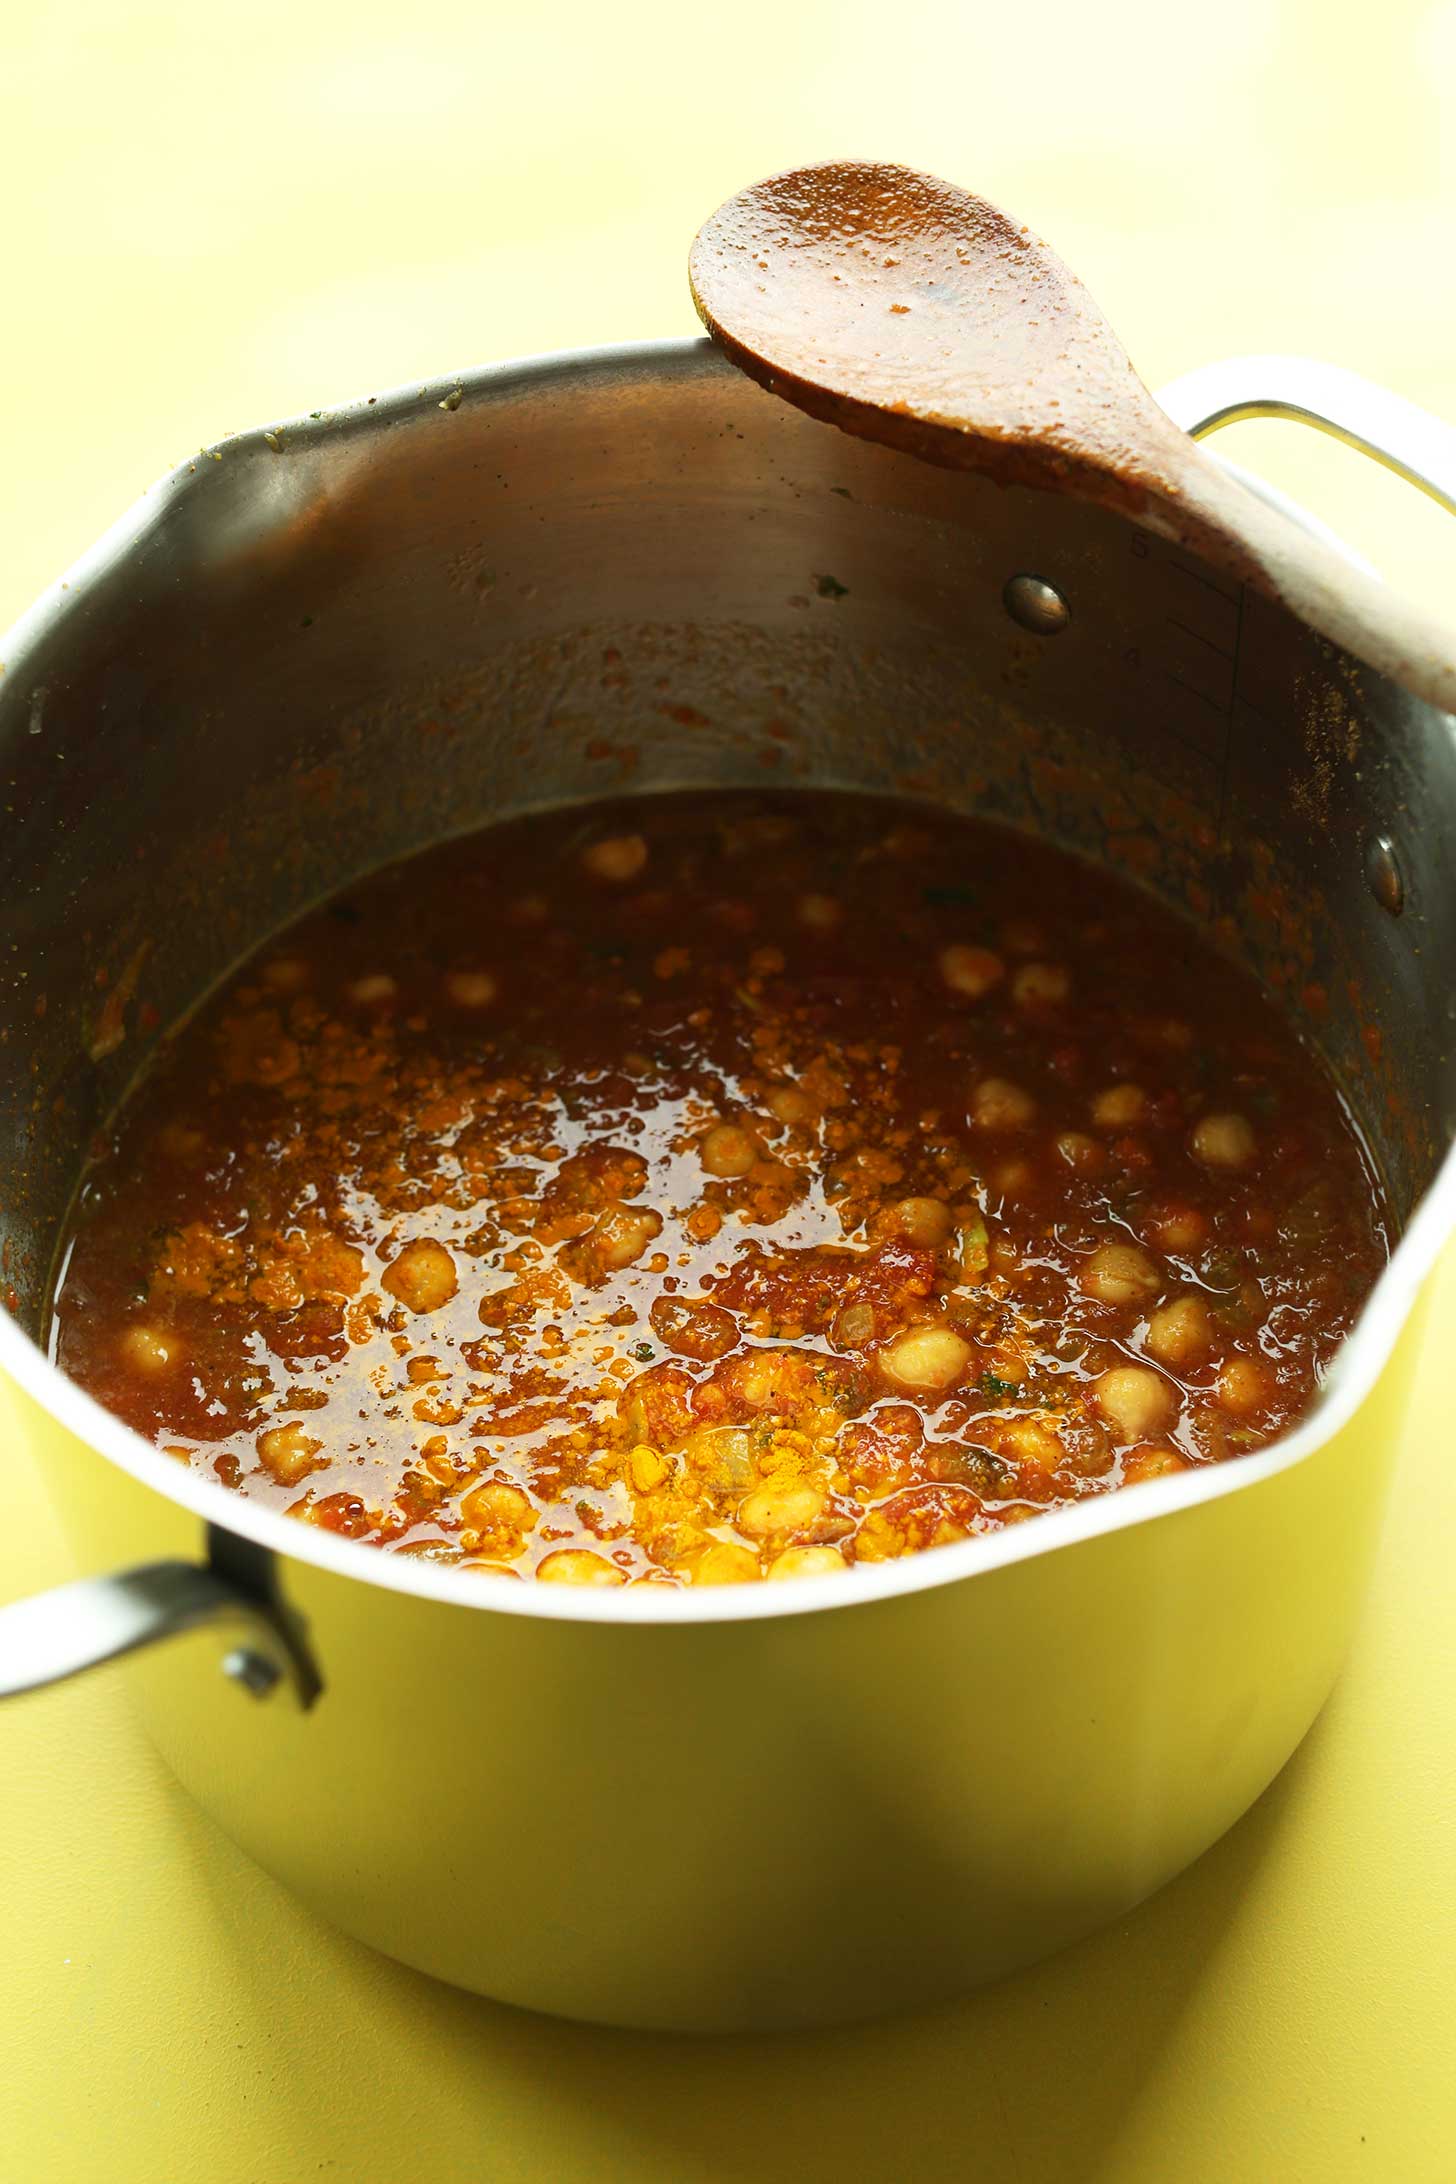 Big pot of our chana masala for a healthy vegan meal